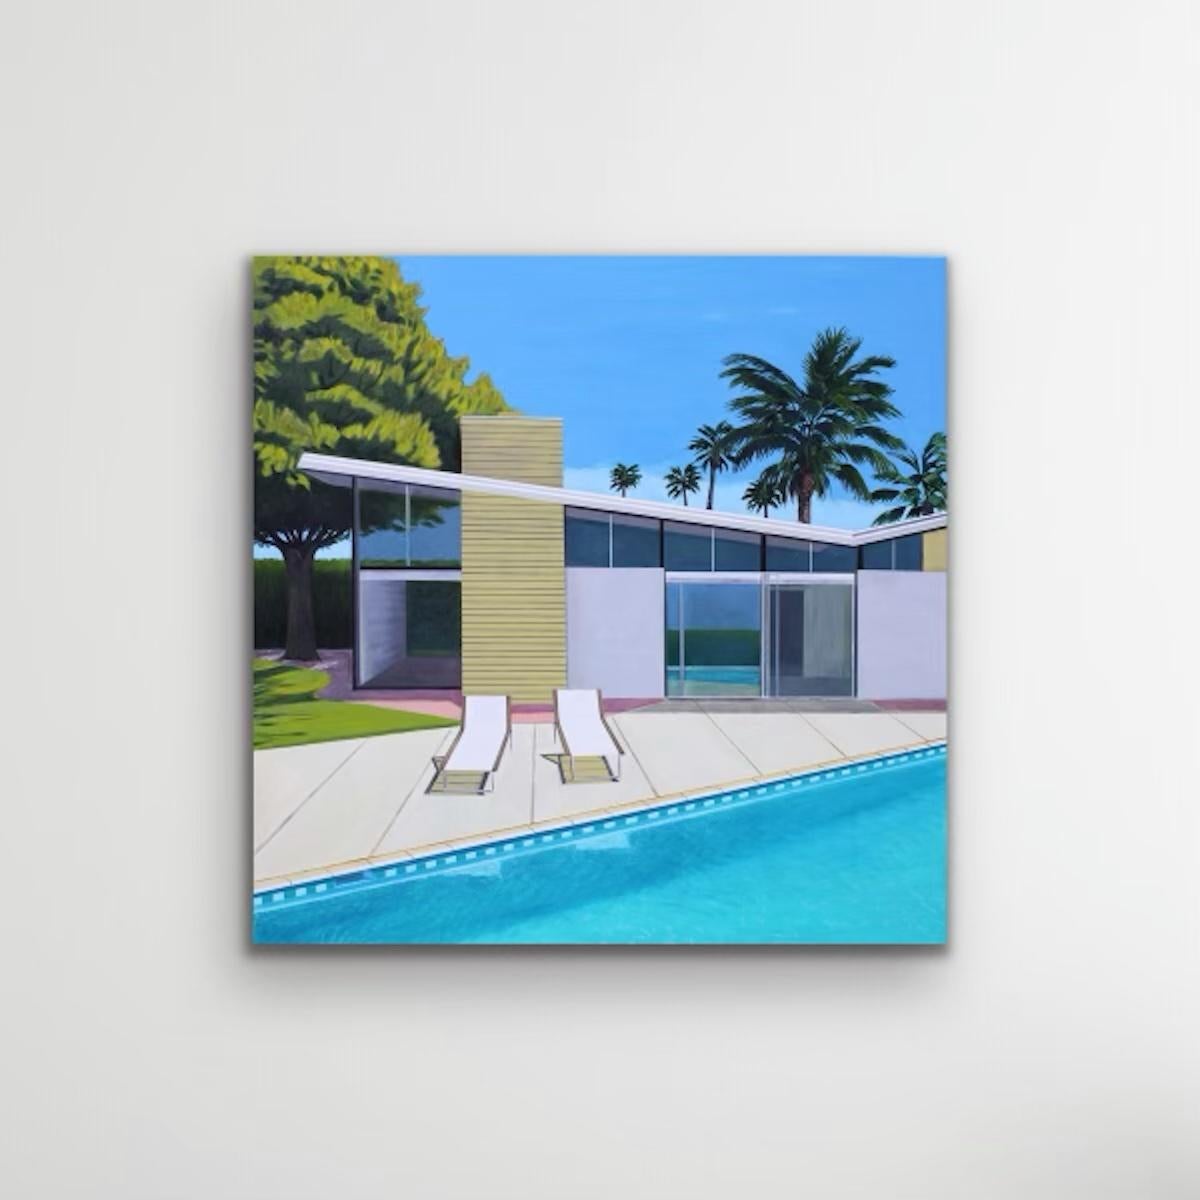 This is a painting from my architectural series of works. In this particular painting I tried to capture a graphic and simple use of colour by keeping the colours neutral and modern. I love modernism and its architecture and it gives me great